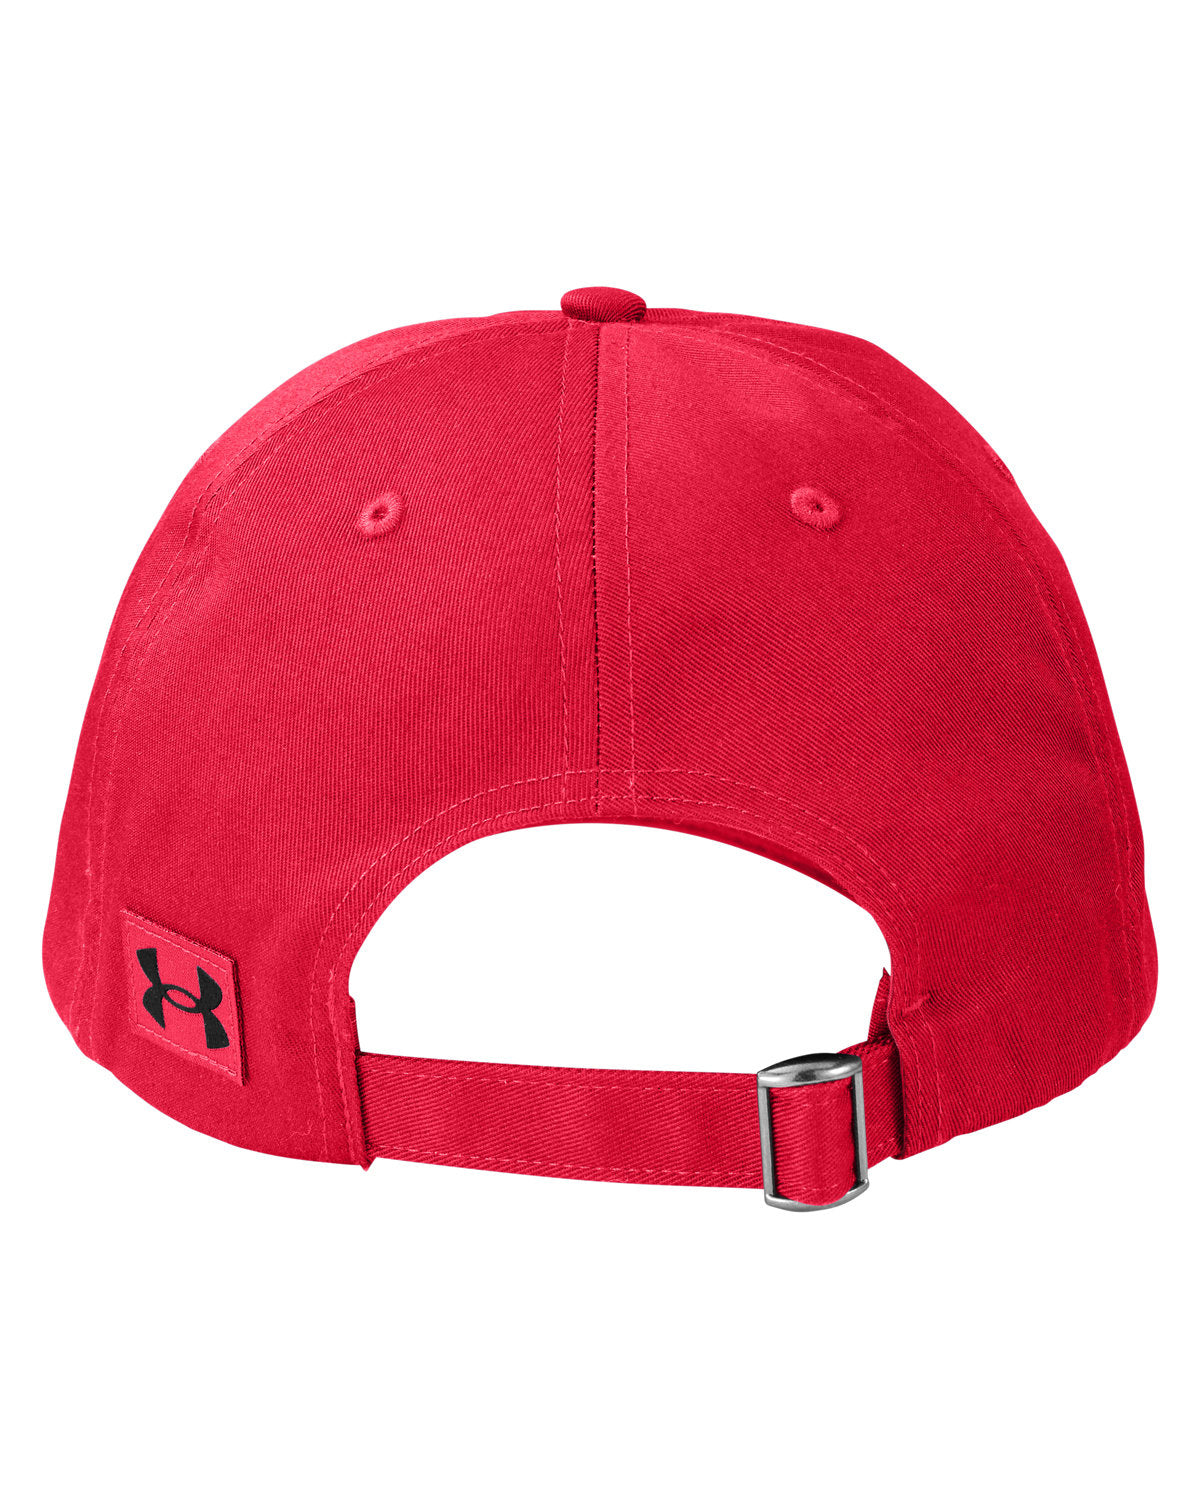 Under Armour Chino Customized Hats, Red